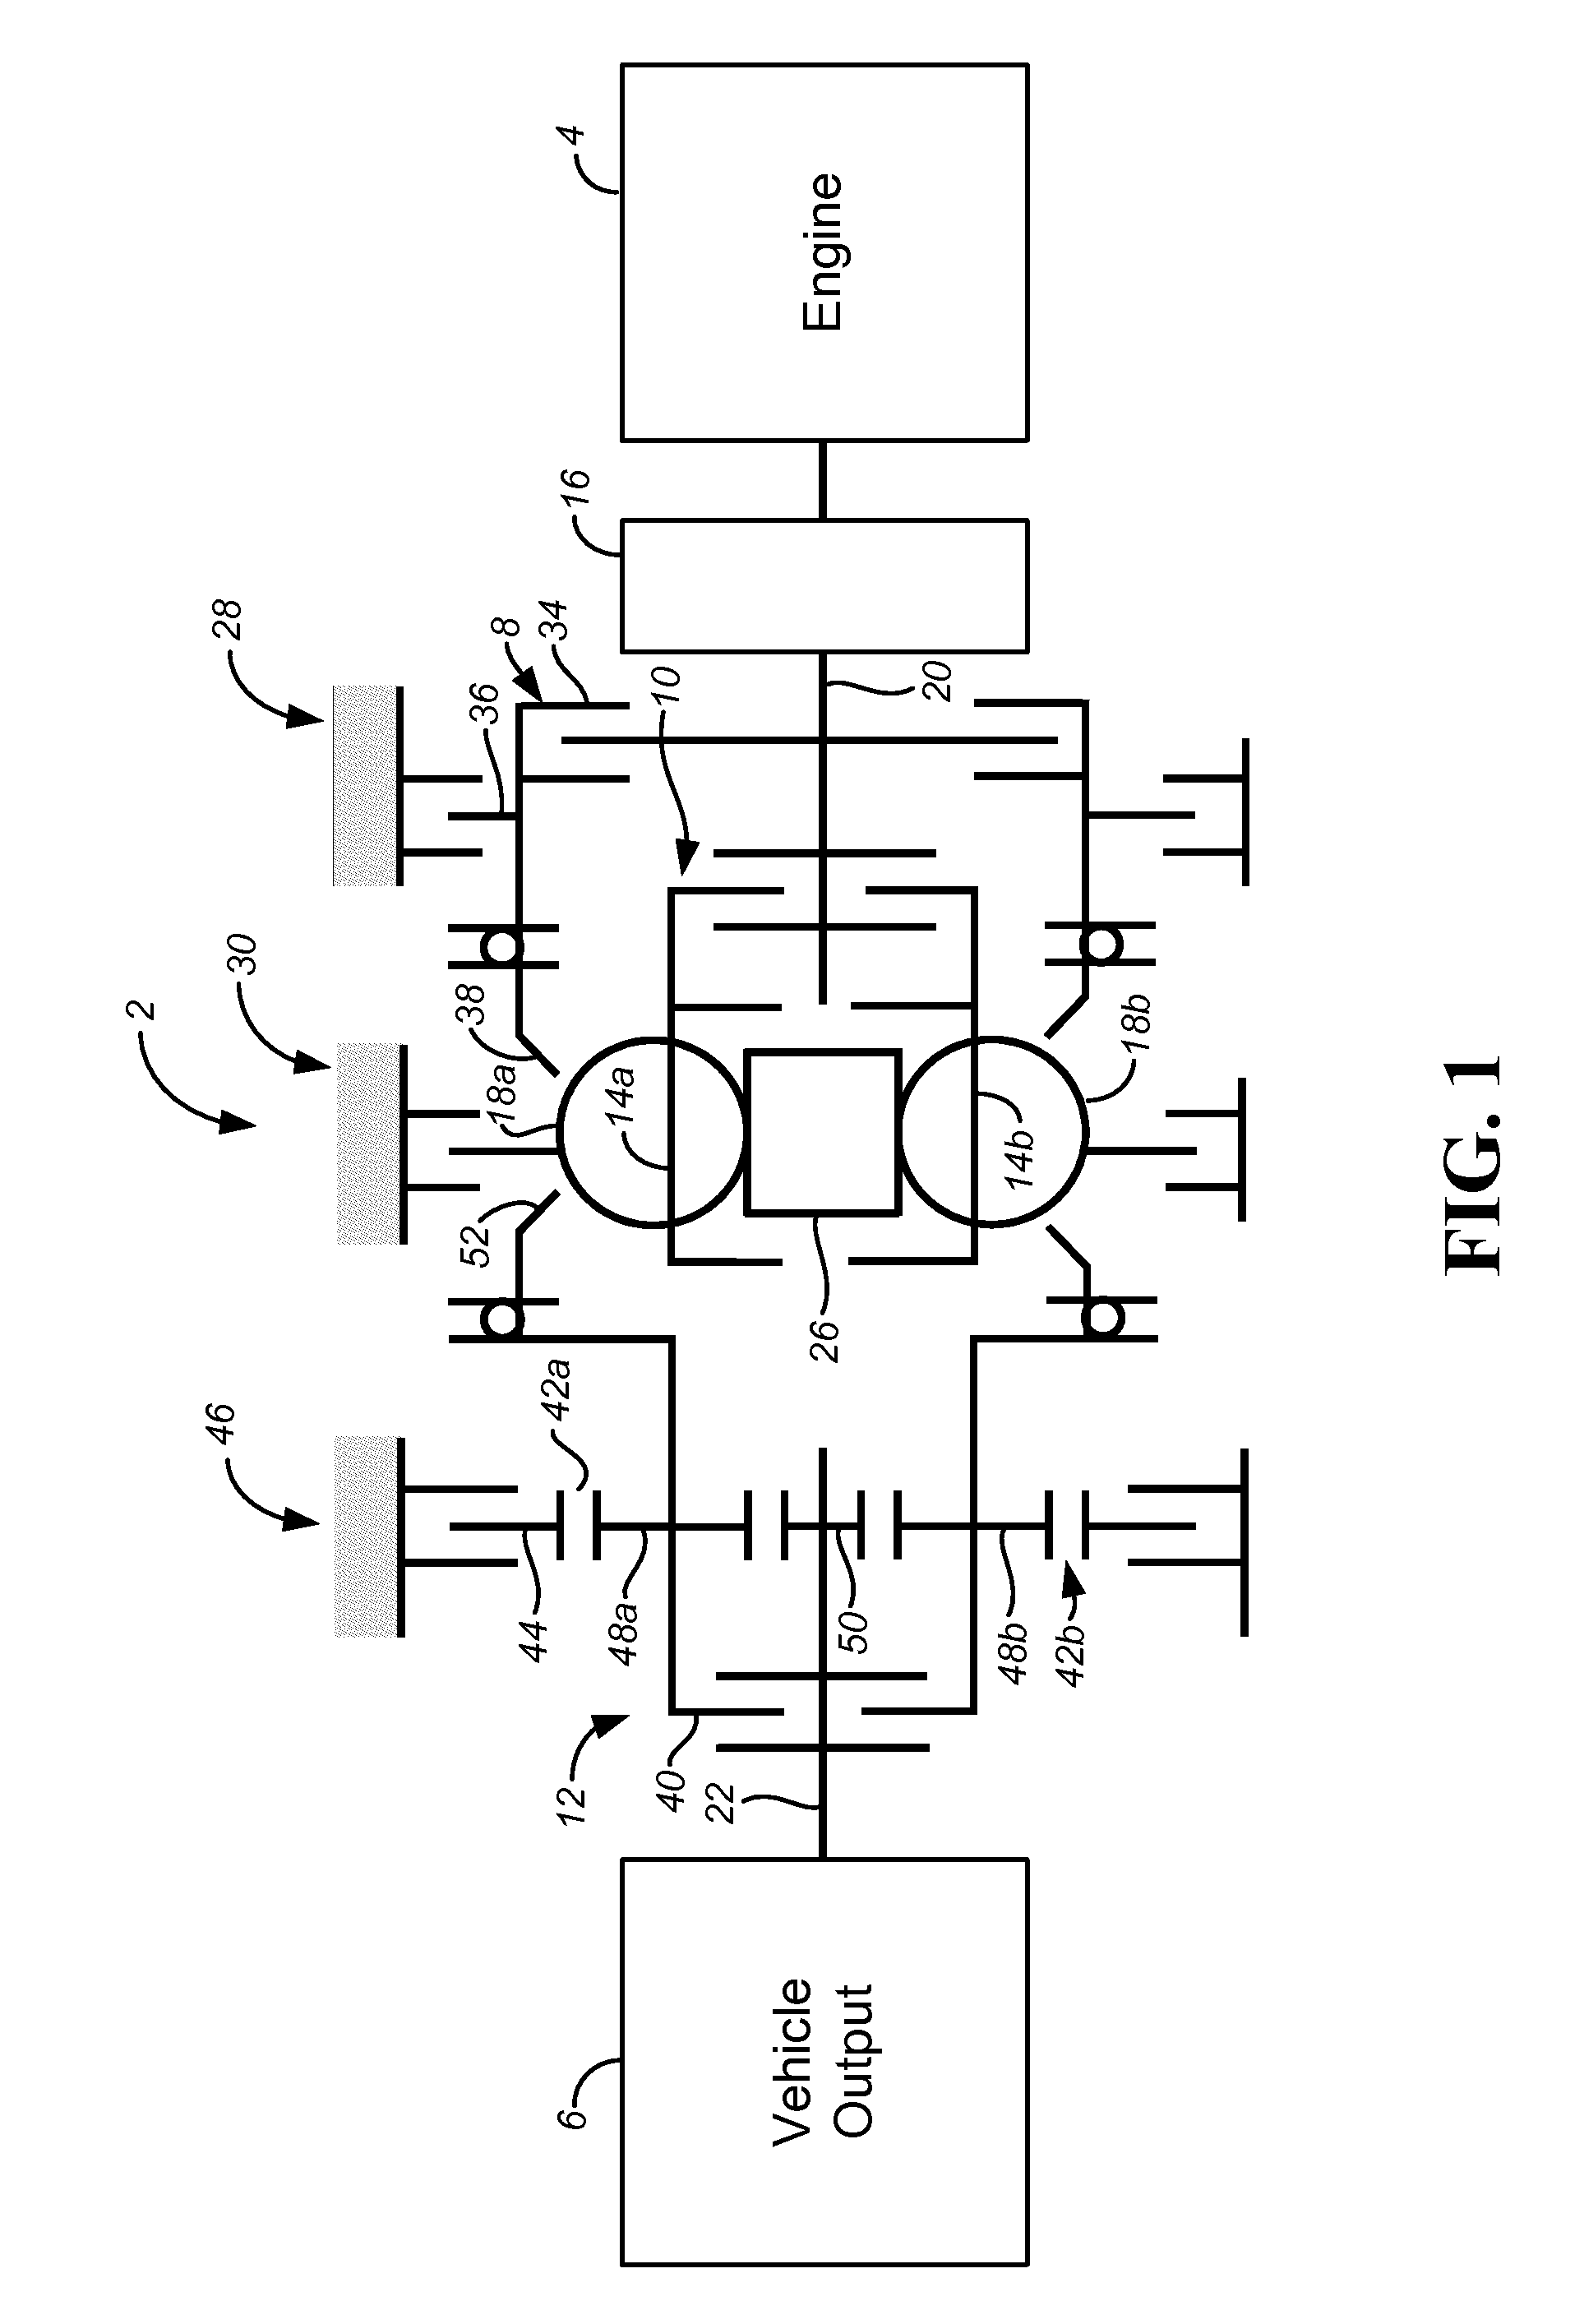 Transmission Having a Continuously or Infinitely Variable Variator Drive